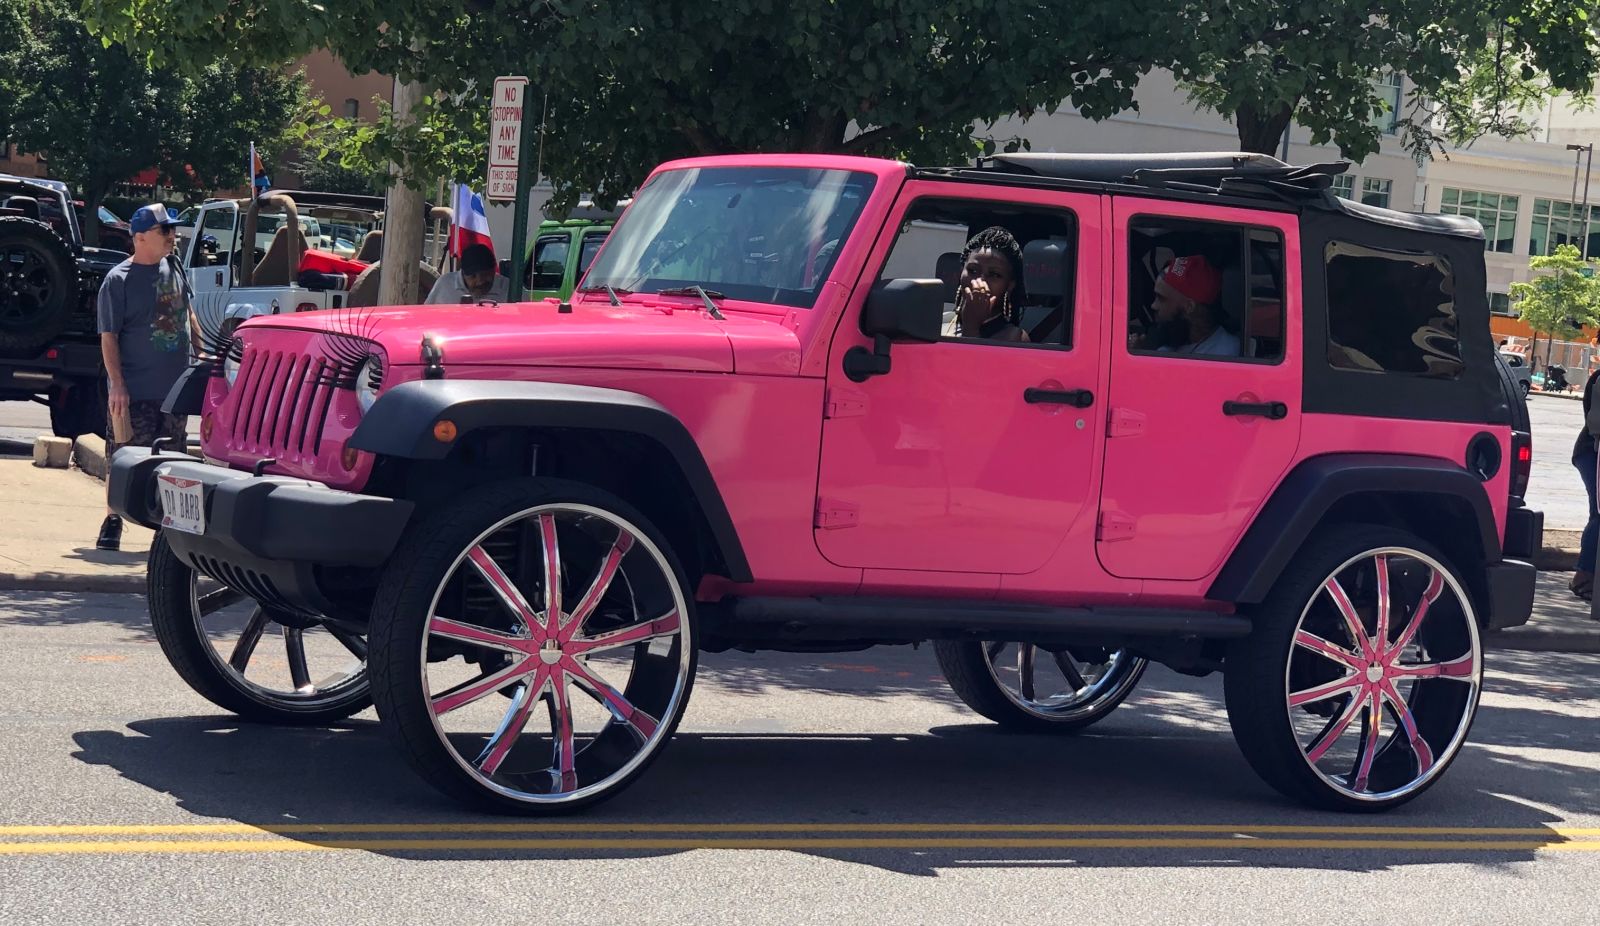 Not my cup of tea, but this family in the parade at the Toledo Jeep Fest looked like they were having a great time. You do you.